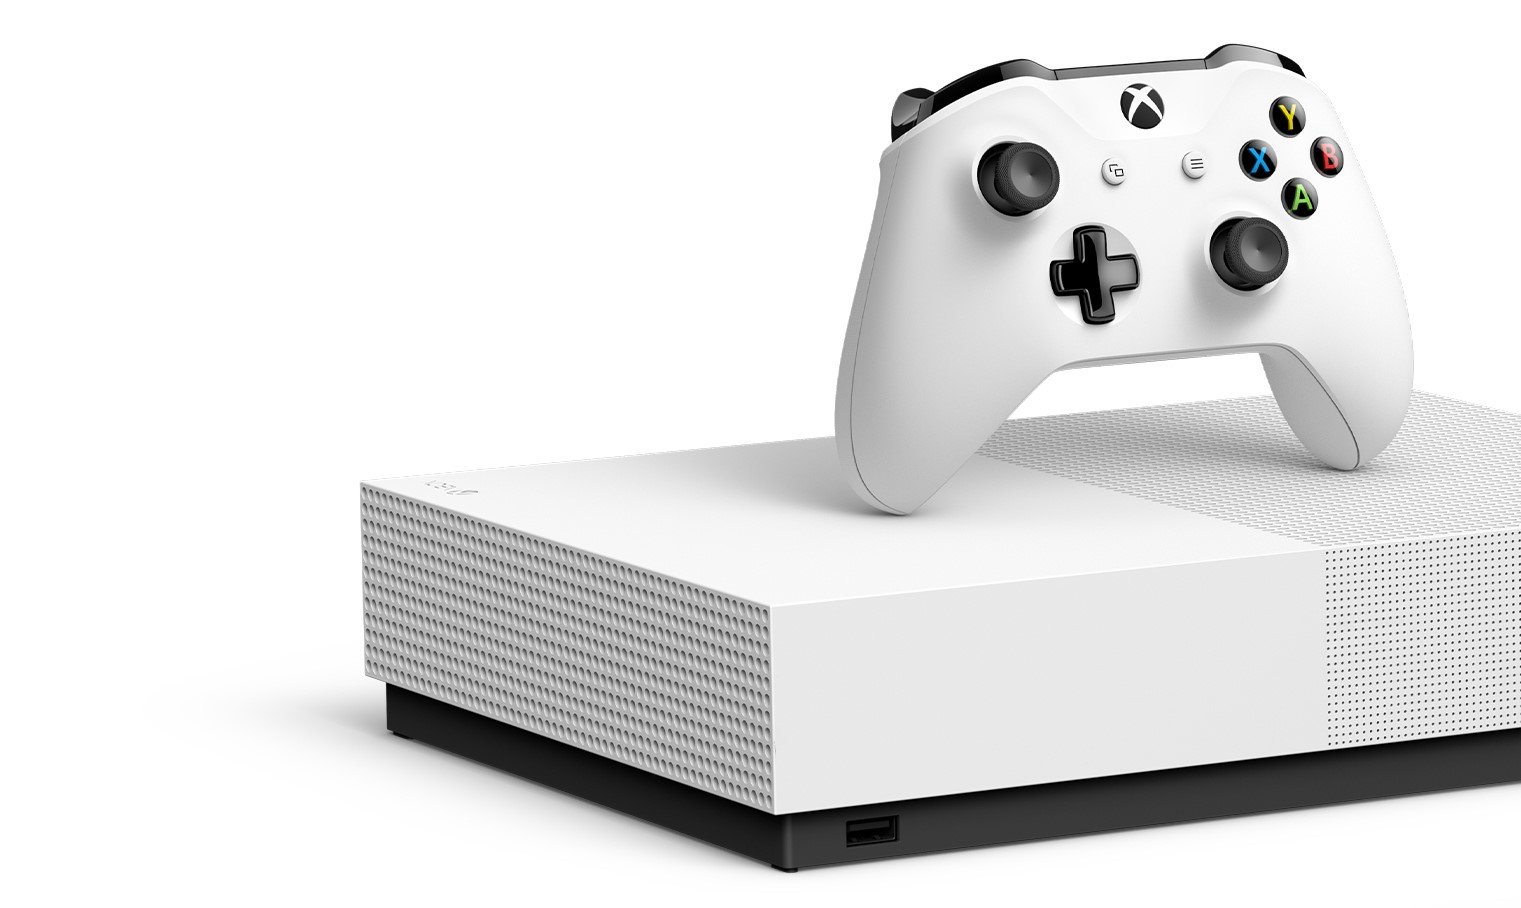 New Xbox One that ditches discs for downloads could arrive in 2019